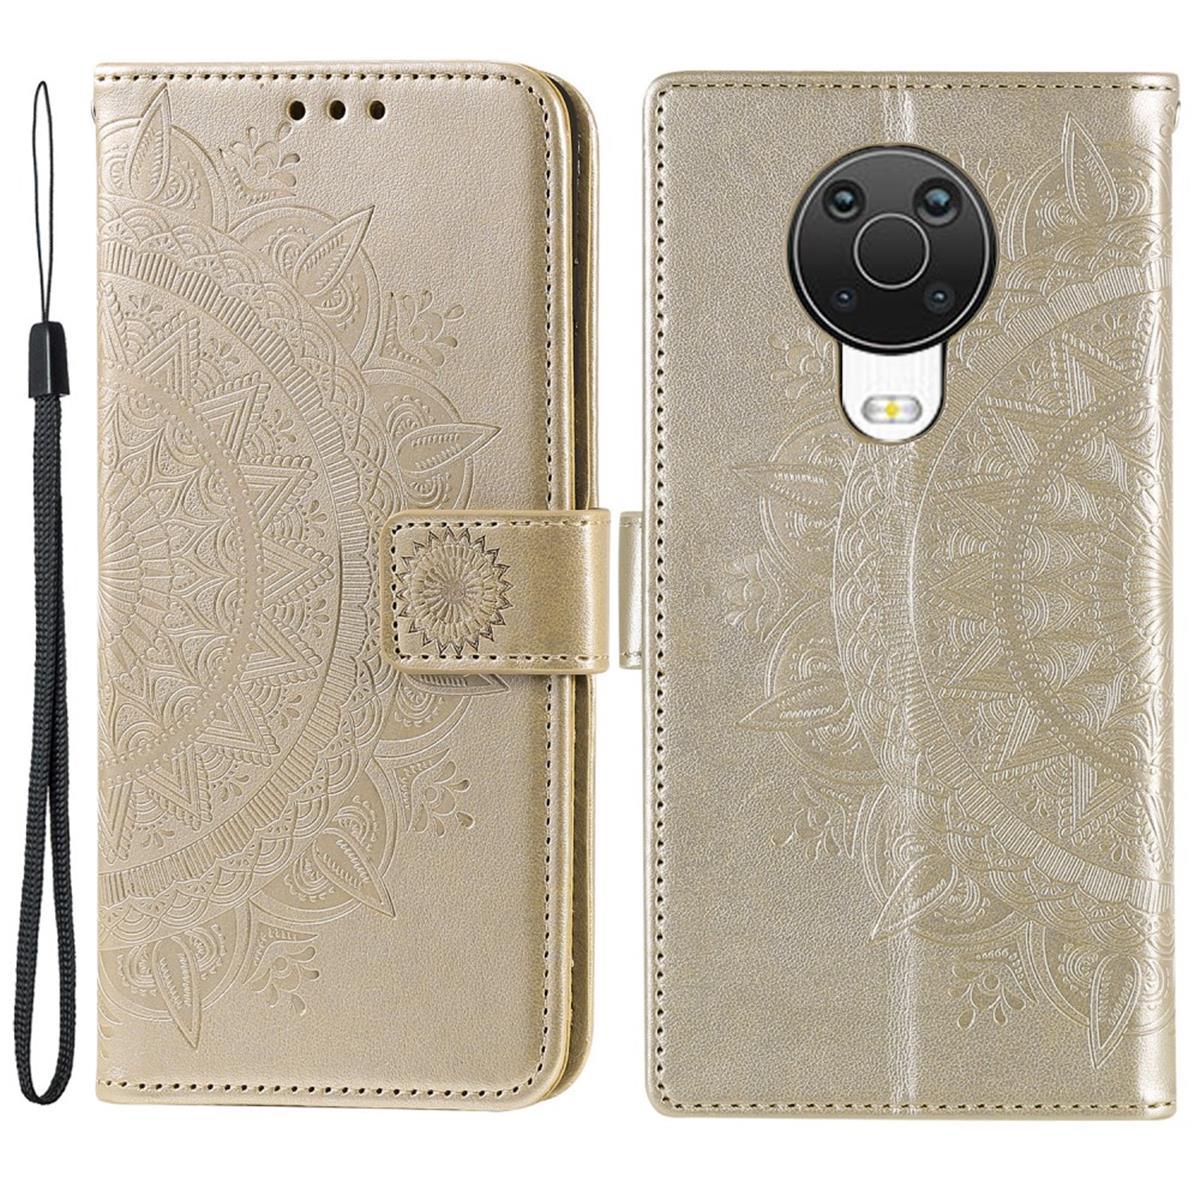 COVERKINGZ Klapphülle Gold mit Bookcover, G10/G20, Mandala Nokia, Muster